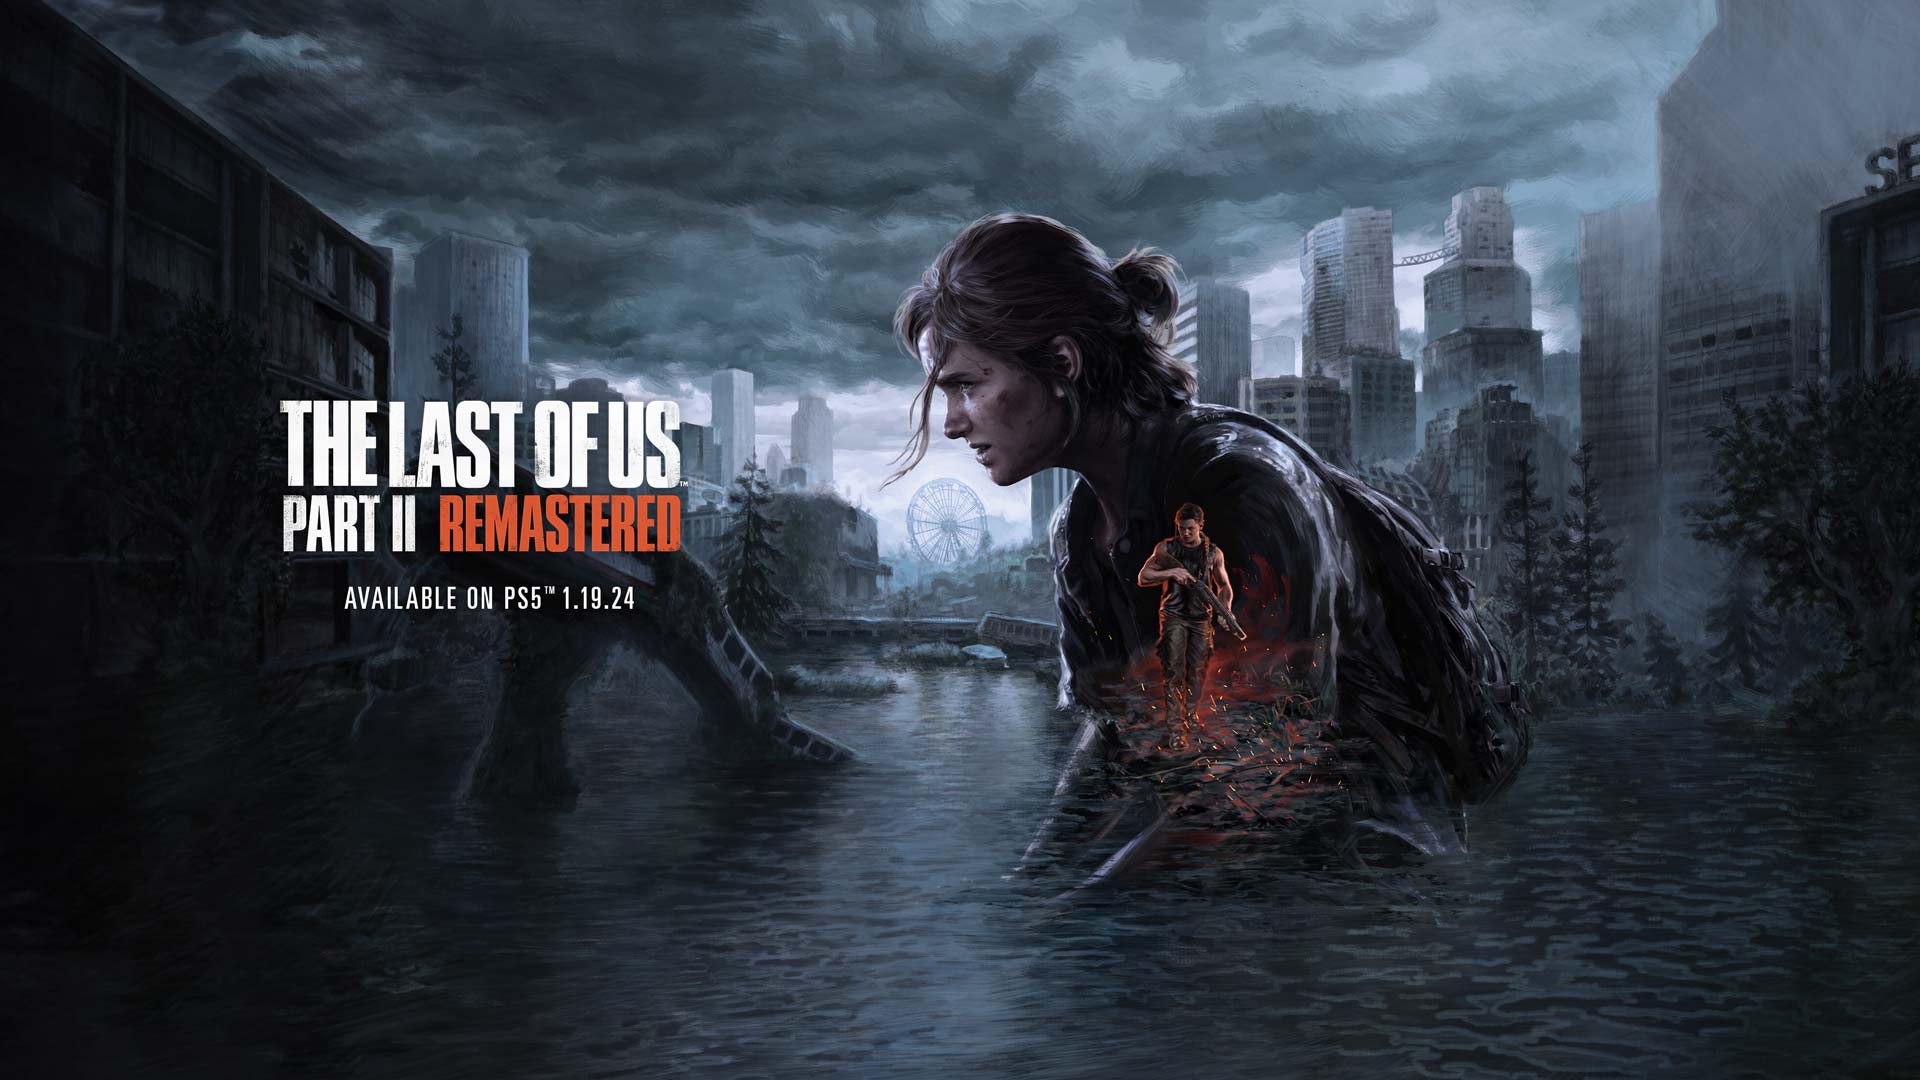 The Remaster of The Last of Us Part 2 has been announced.  Coming to PlayStation 5 in January